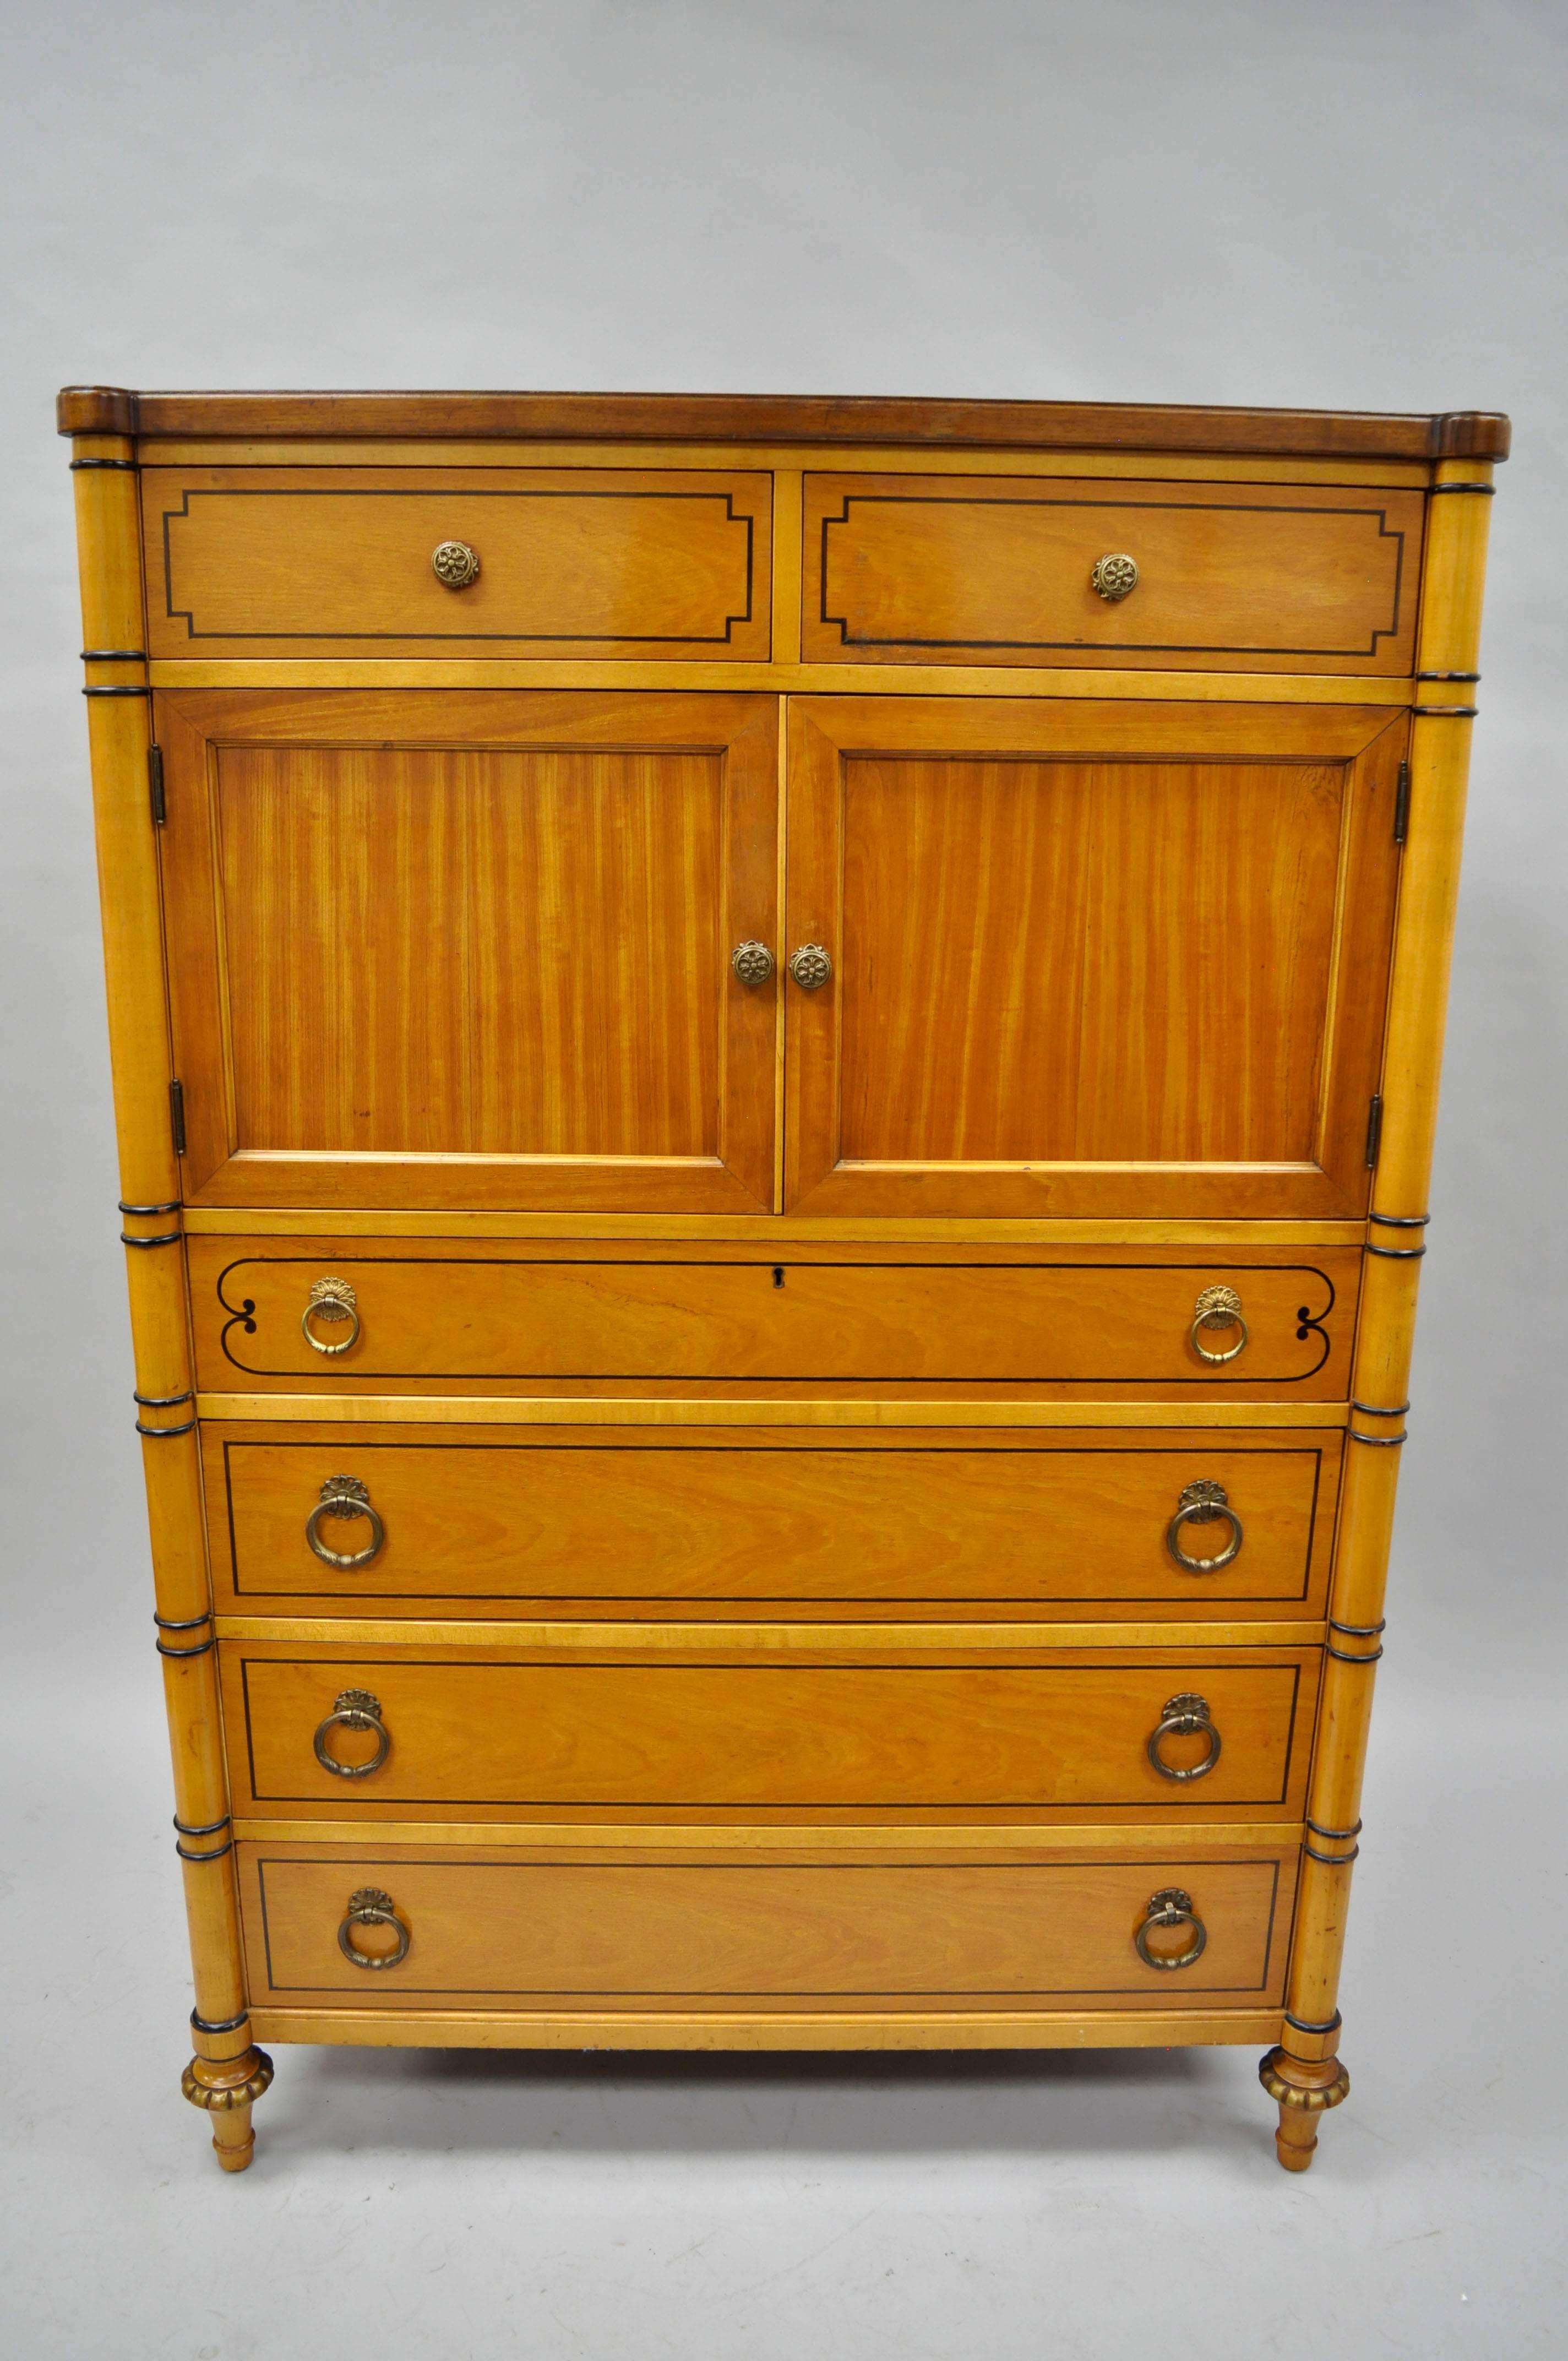 Beautiful vintage Kittinger French Louis XVI / Regency style tall chest cabinet in walnut with stunning rosewood veneer top. Item features nine dovetail constructed drawers, two upper cabinet swing doors, black paint decorated accents, brass drop